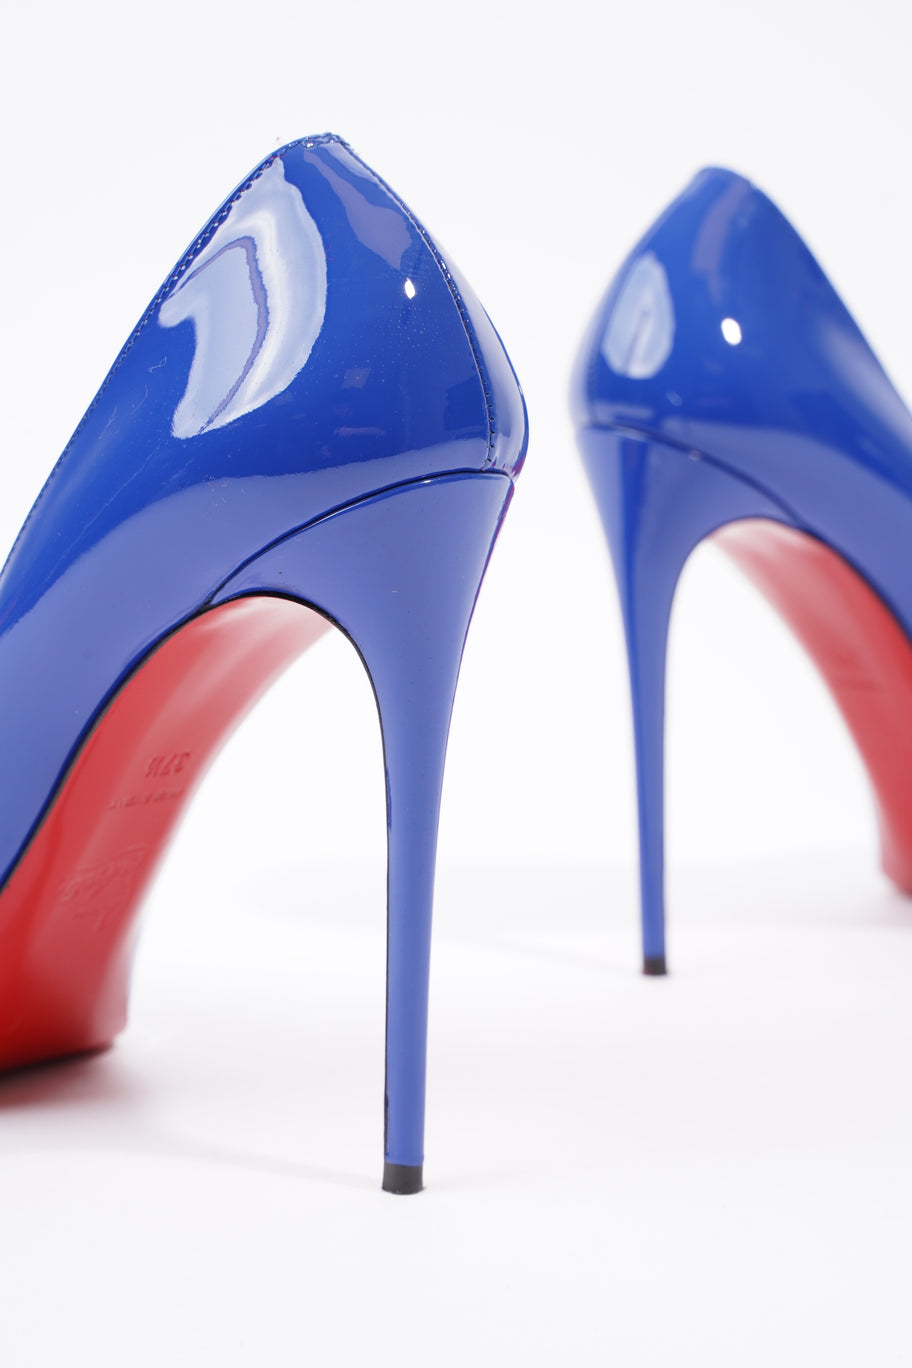 New Very Prive Heels 120 Blue Patent Leather EU 37.5 UK 4.5 Image 10